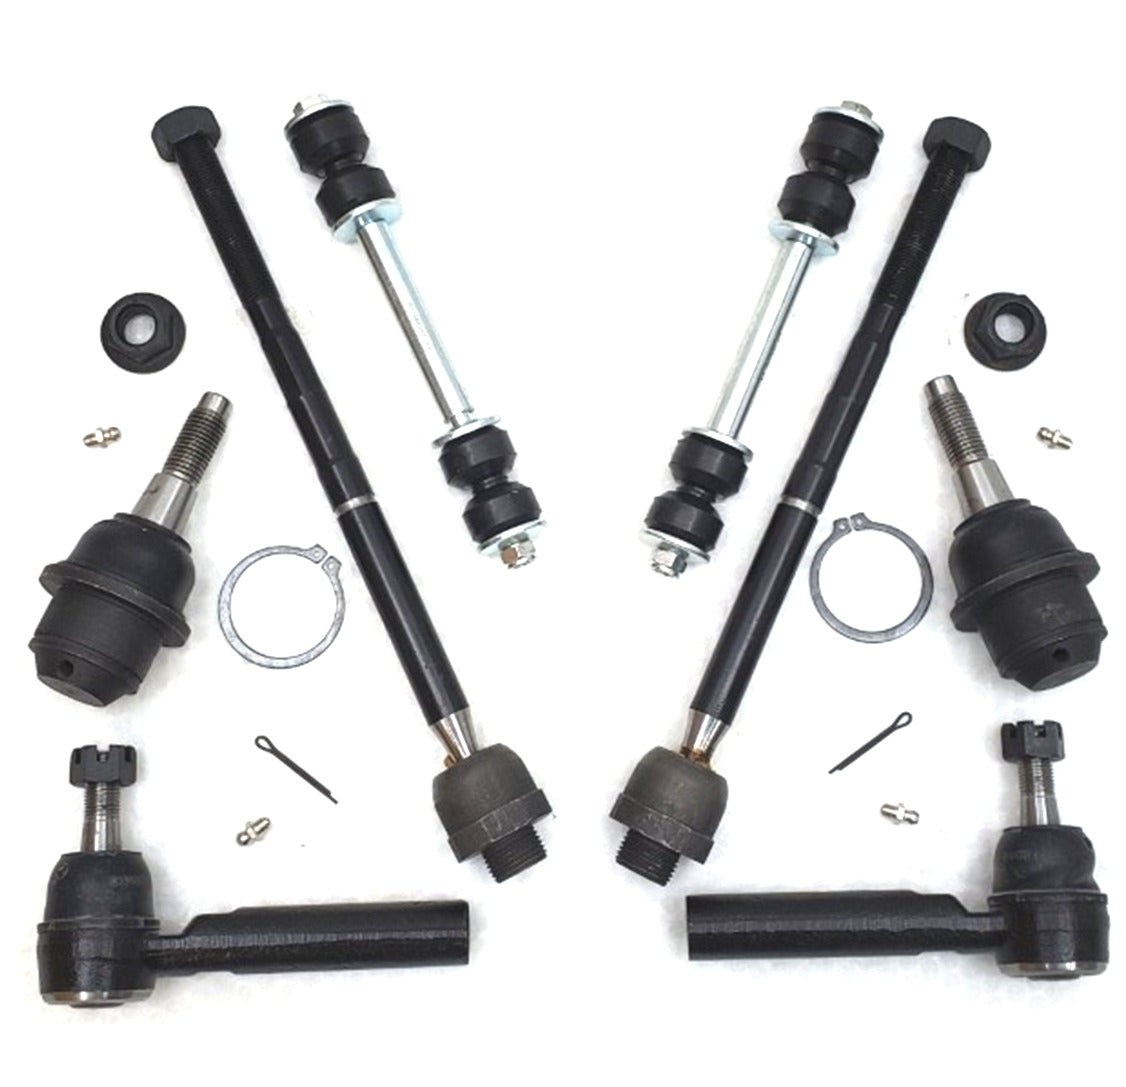 HD Ball Joint Tie Rod Links Steering Kit for 2007-2013 Cadillac, Chevrolet, GMC 2WD, 4x4